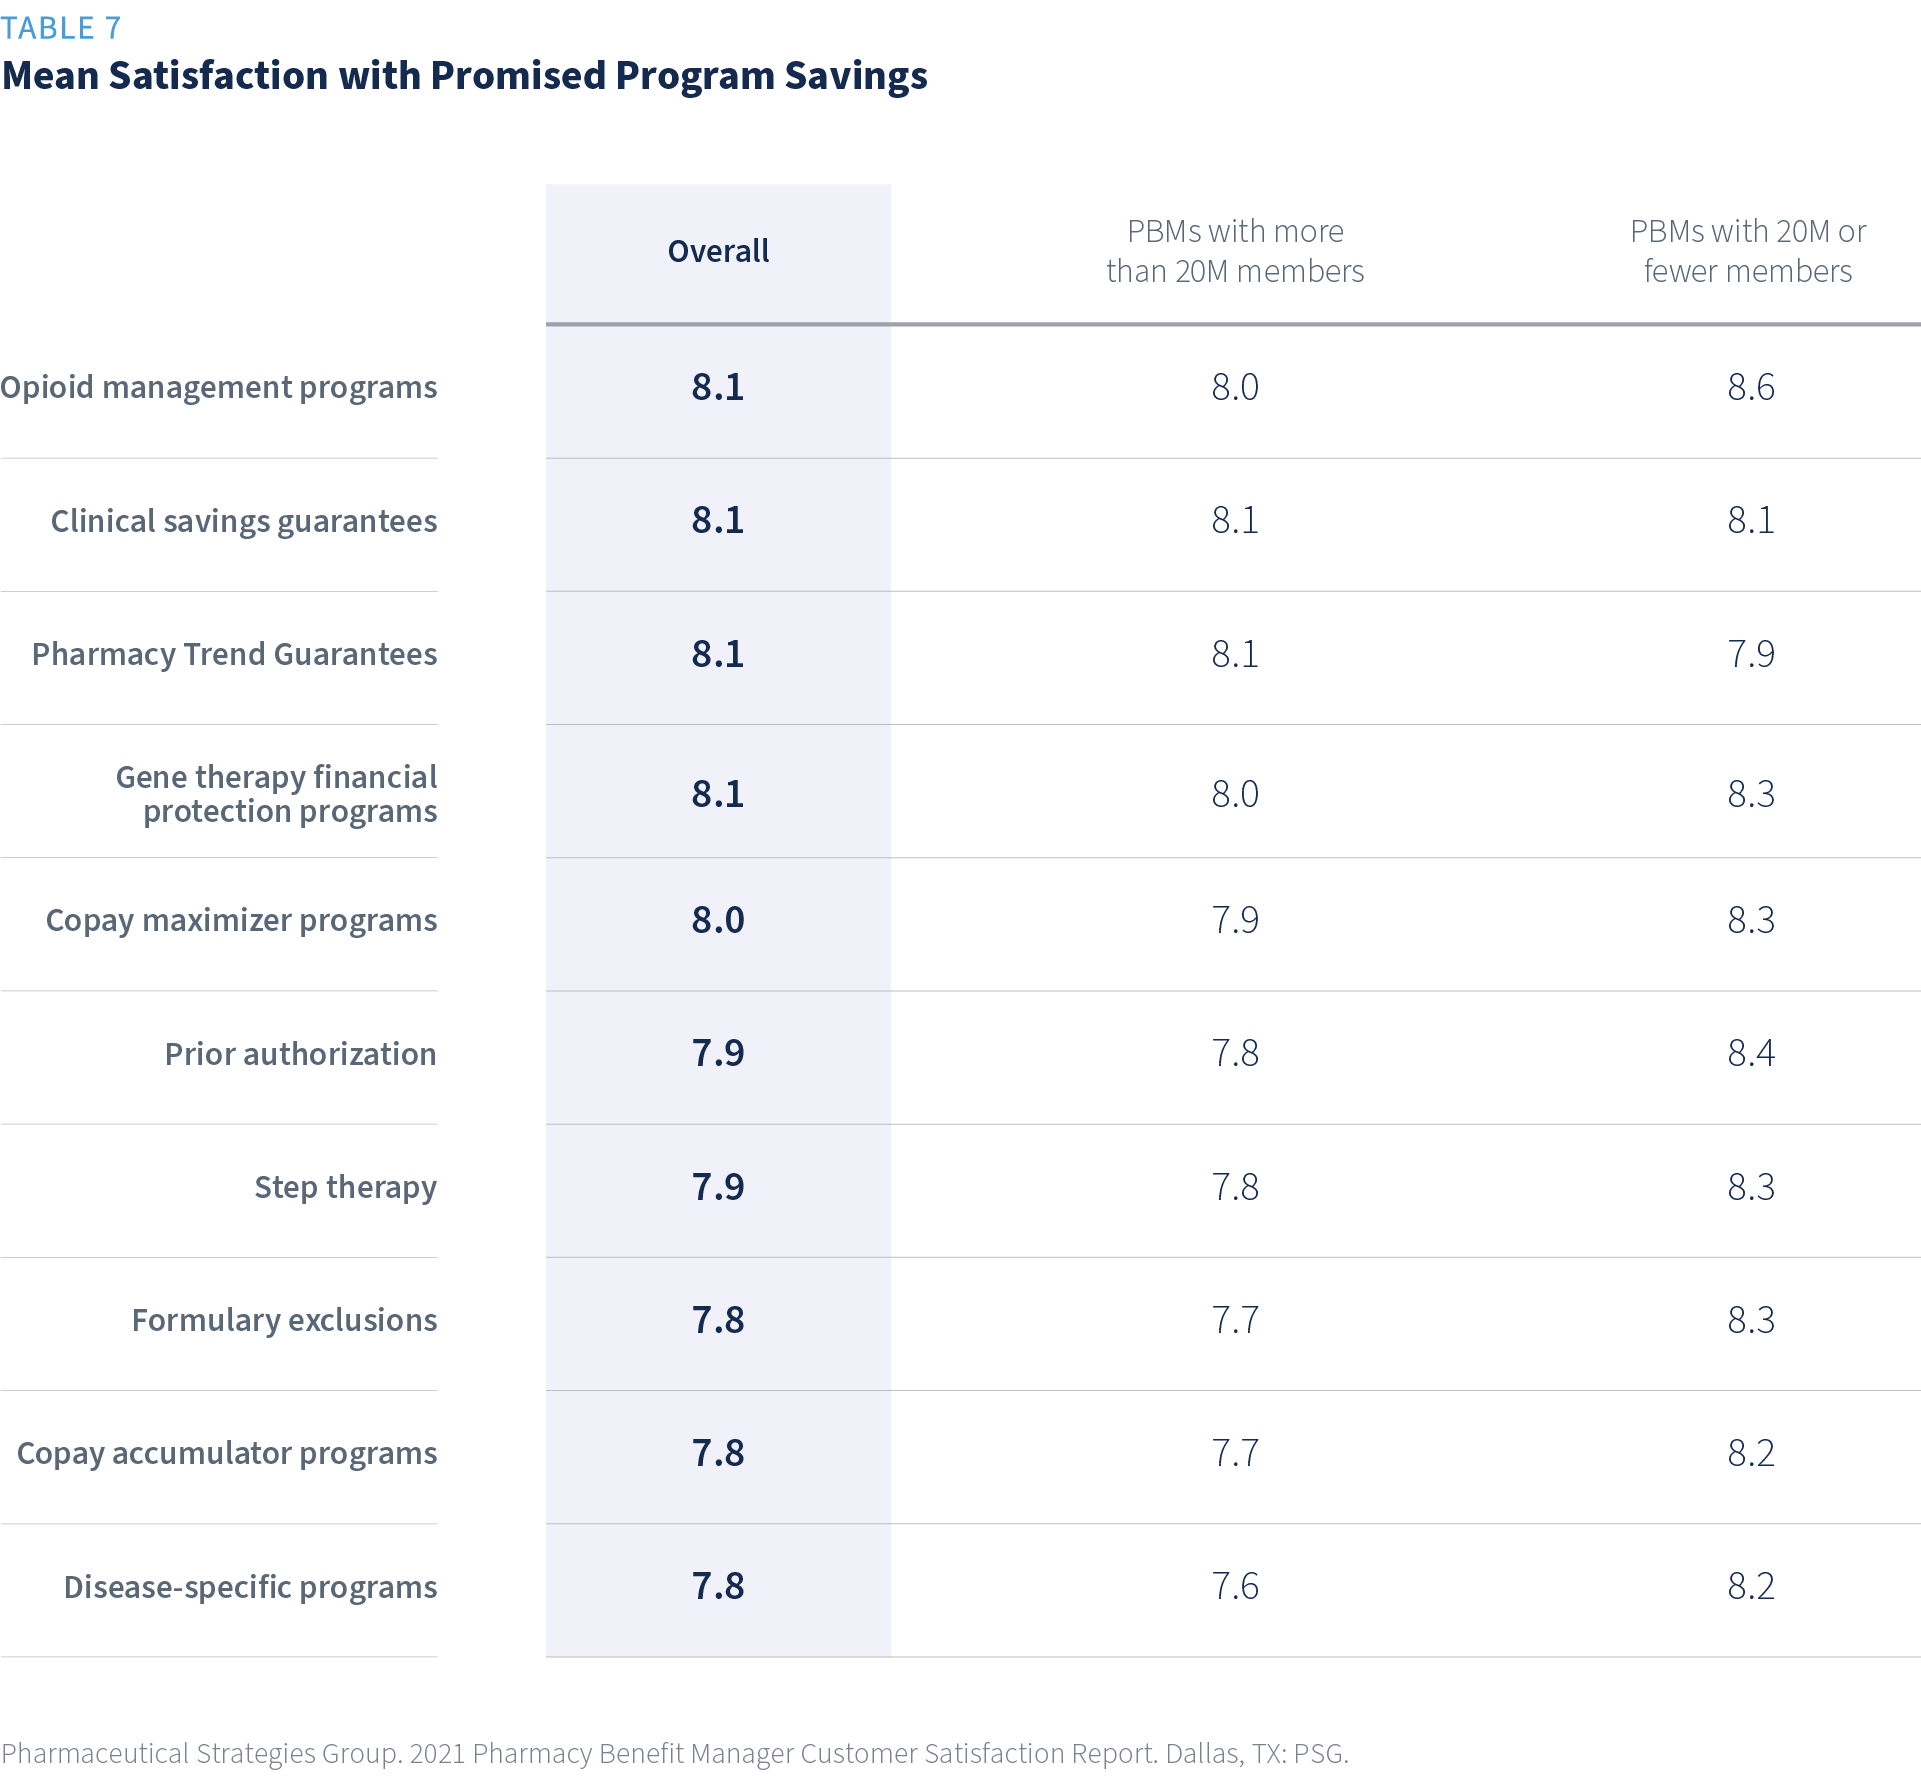 Mean satisfaction with promised program savings survey results